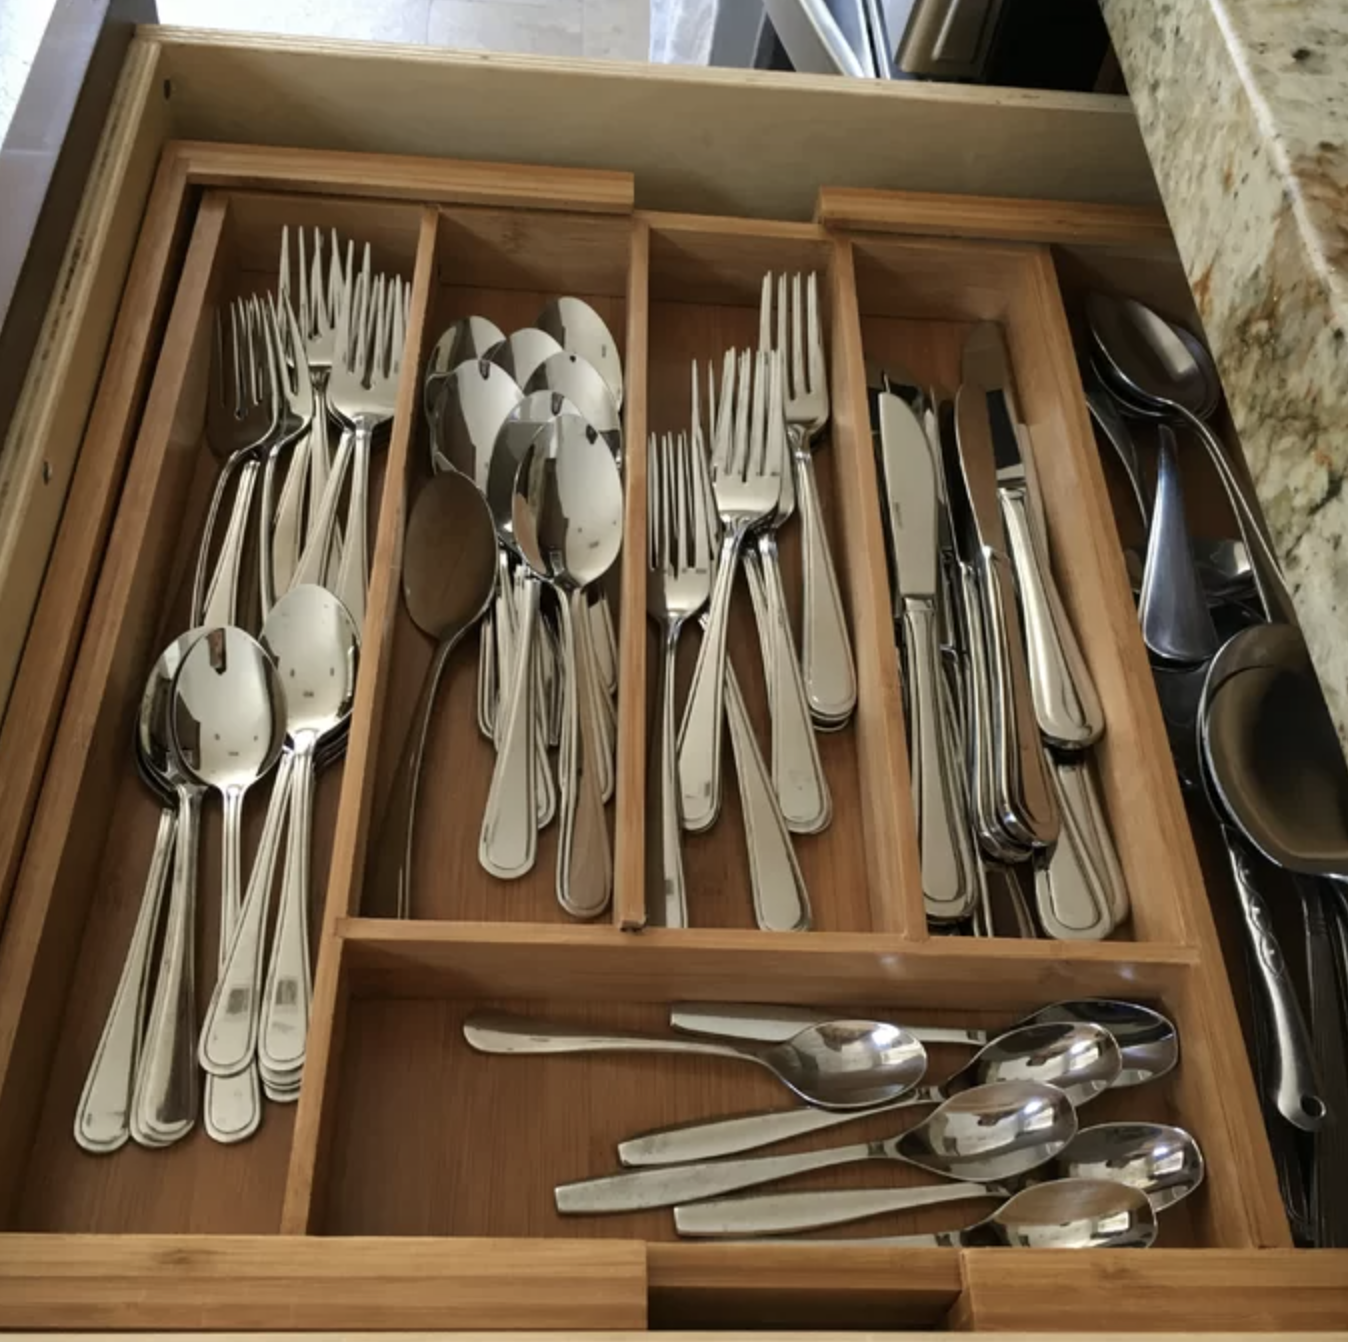 the wooden drawer organizer with utensils in it